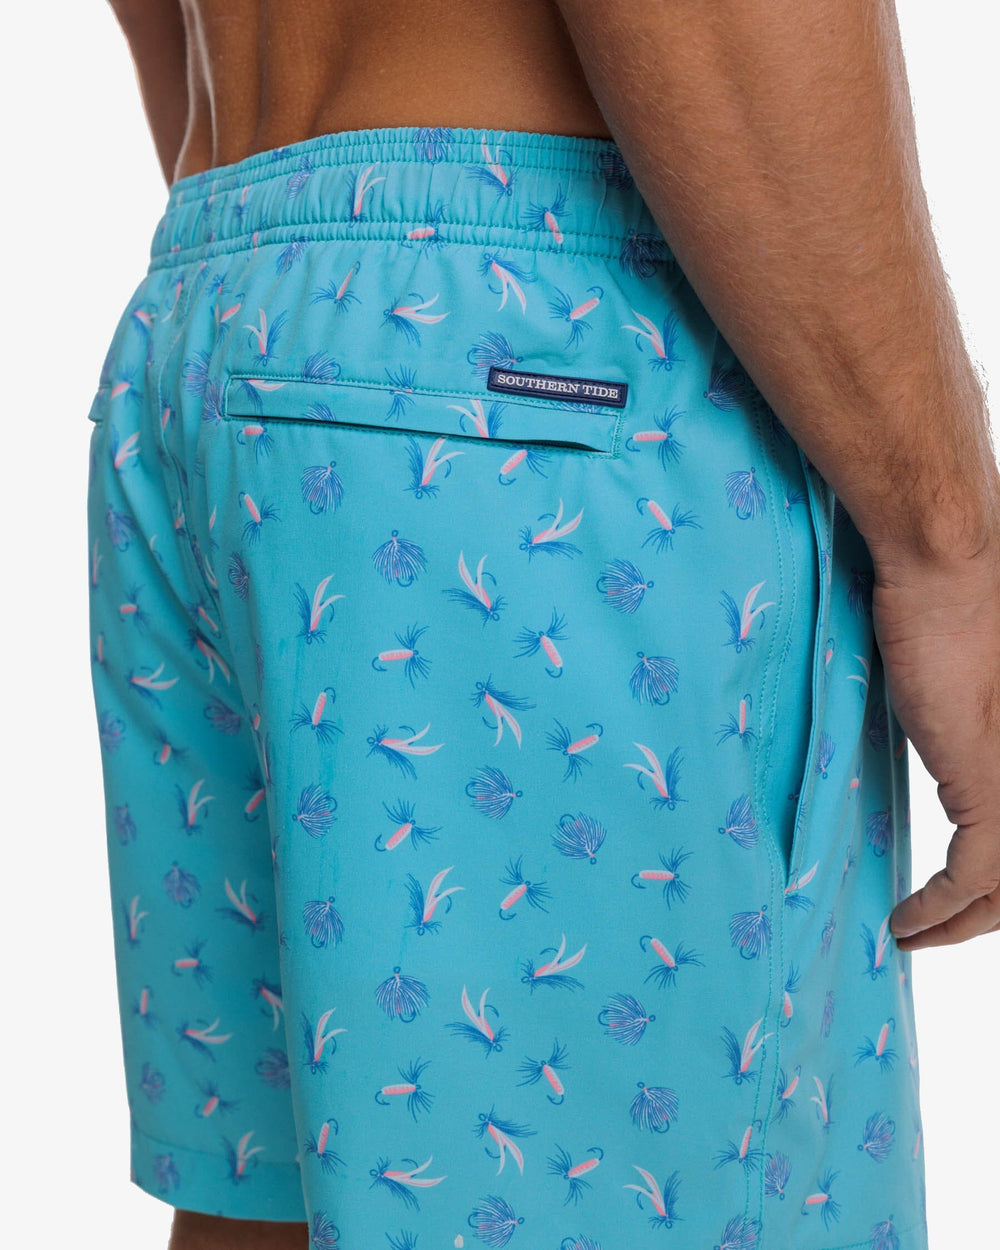 The detail view of the Southern Tide Guy With Allure Printed Swim Trunk by Southern Tide - Tidal Wave